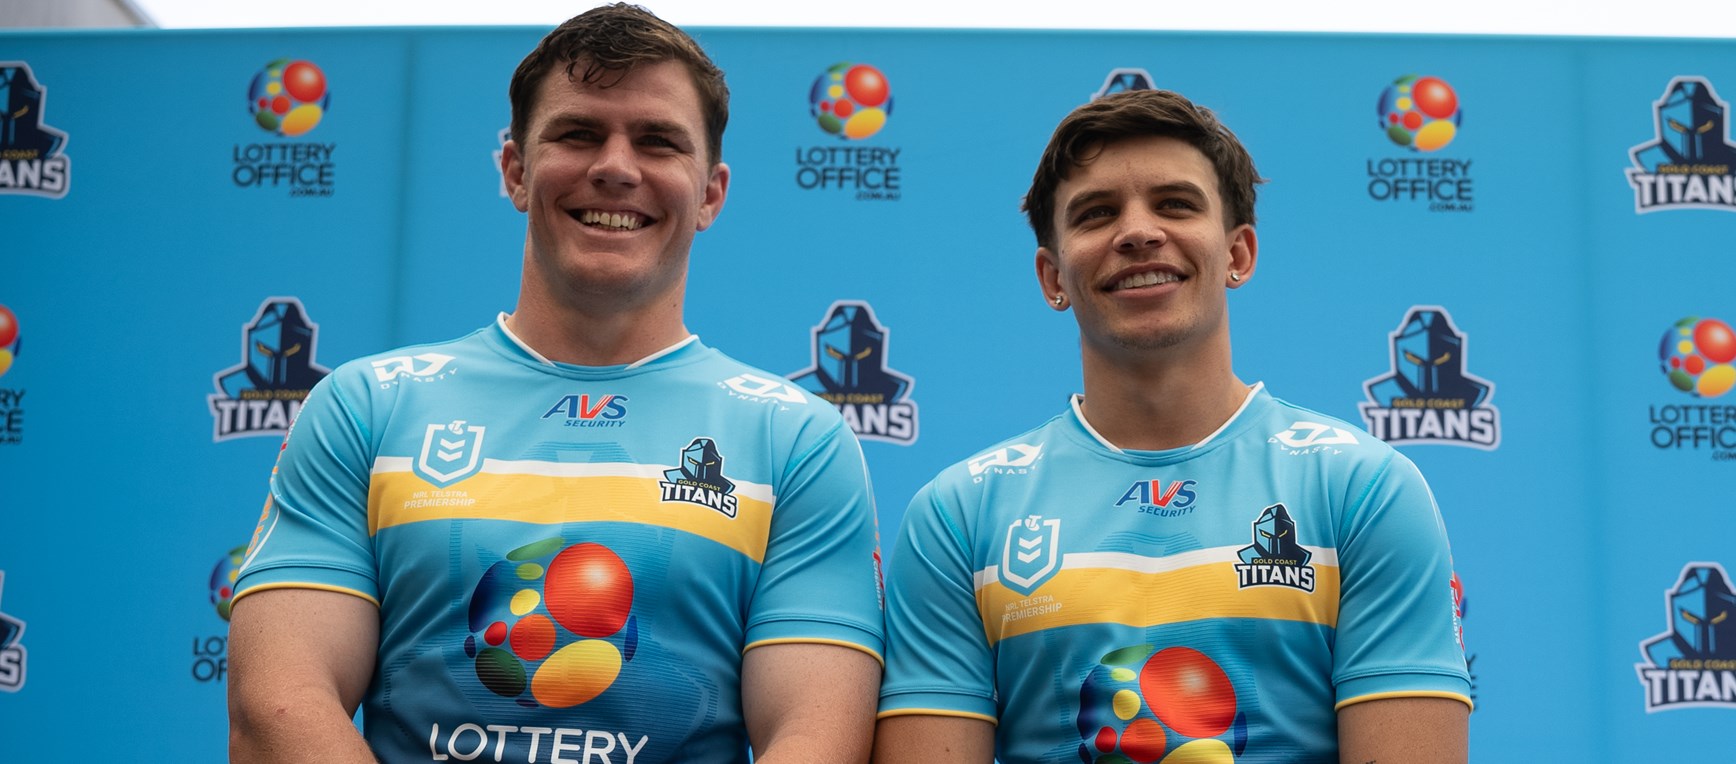 Titans and The Lottery Office partnership launch